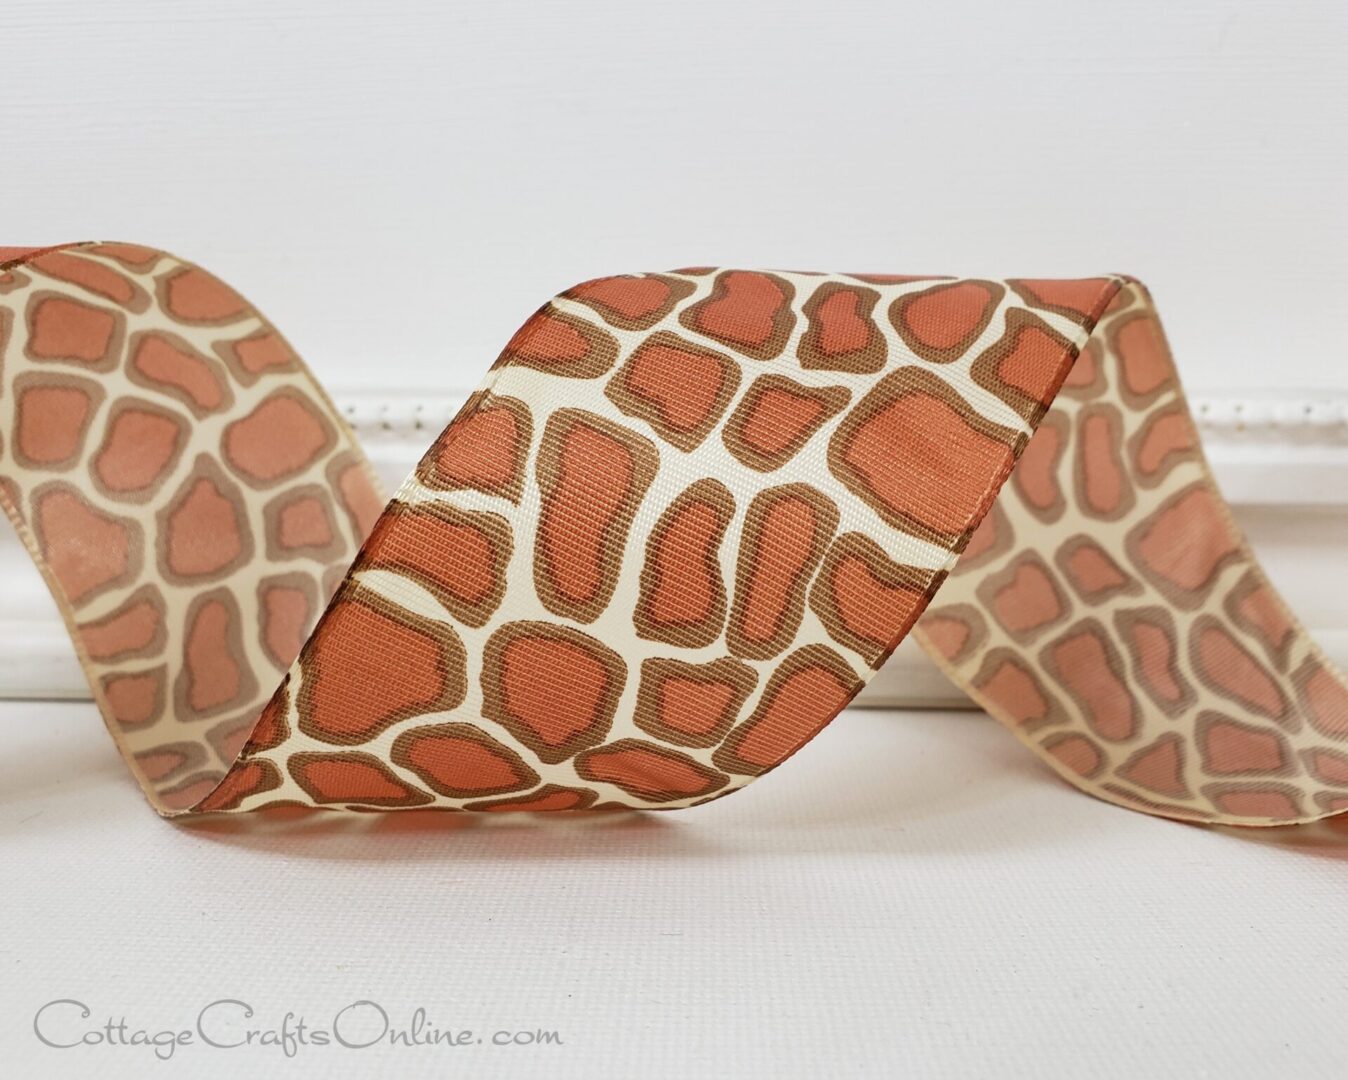 A giraffe print ribbon is sitting on top of a table.